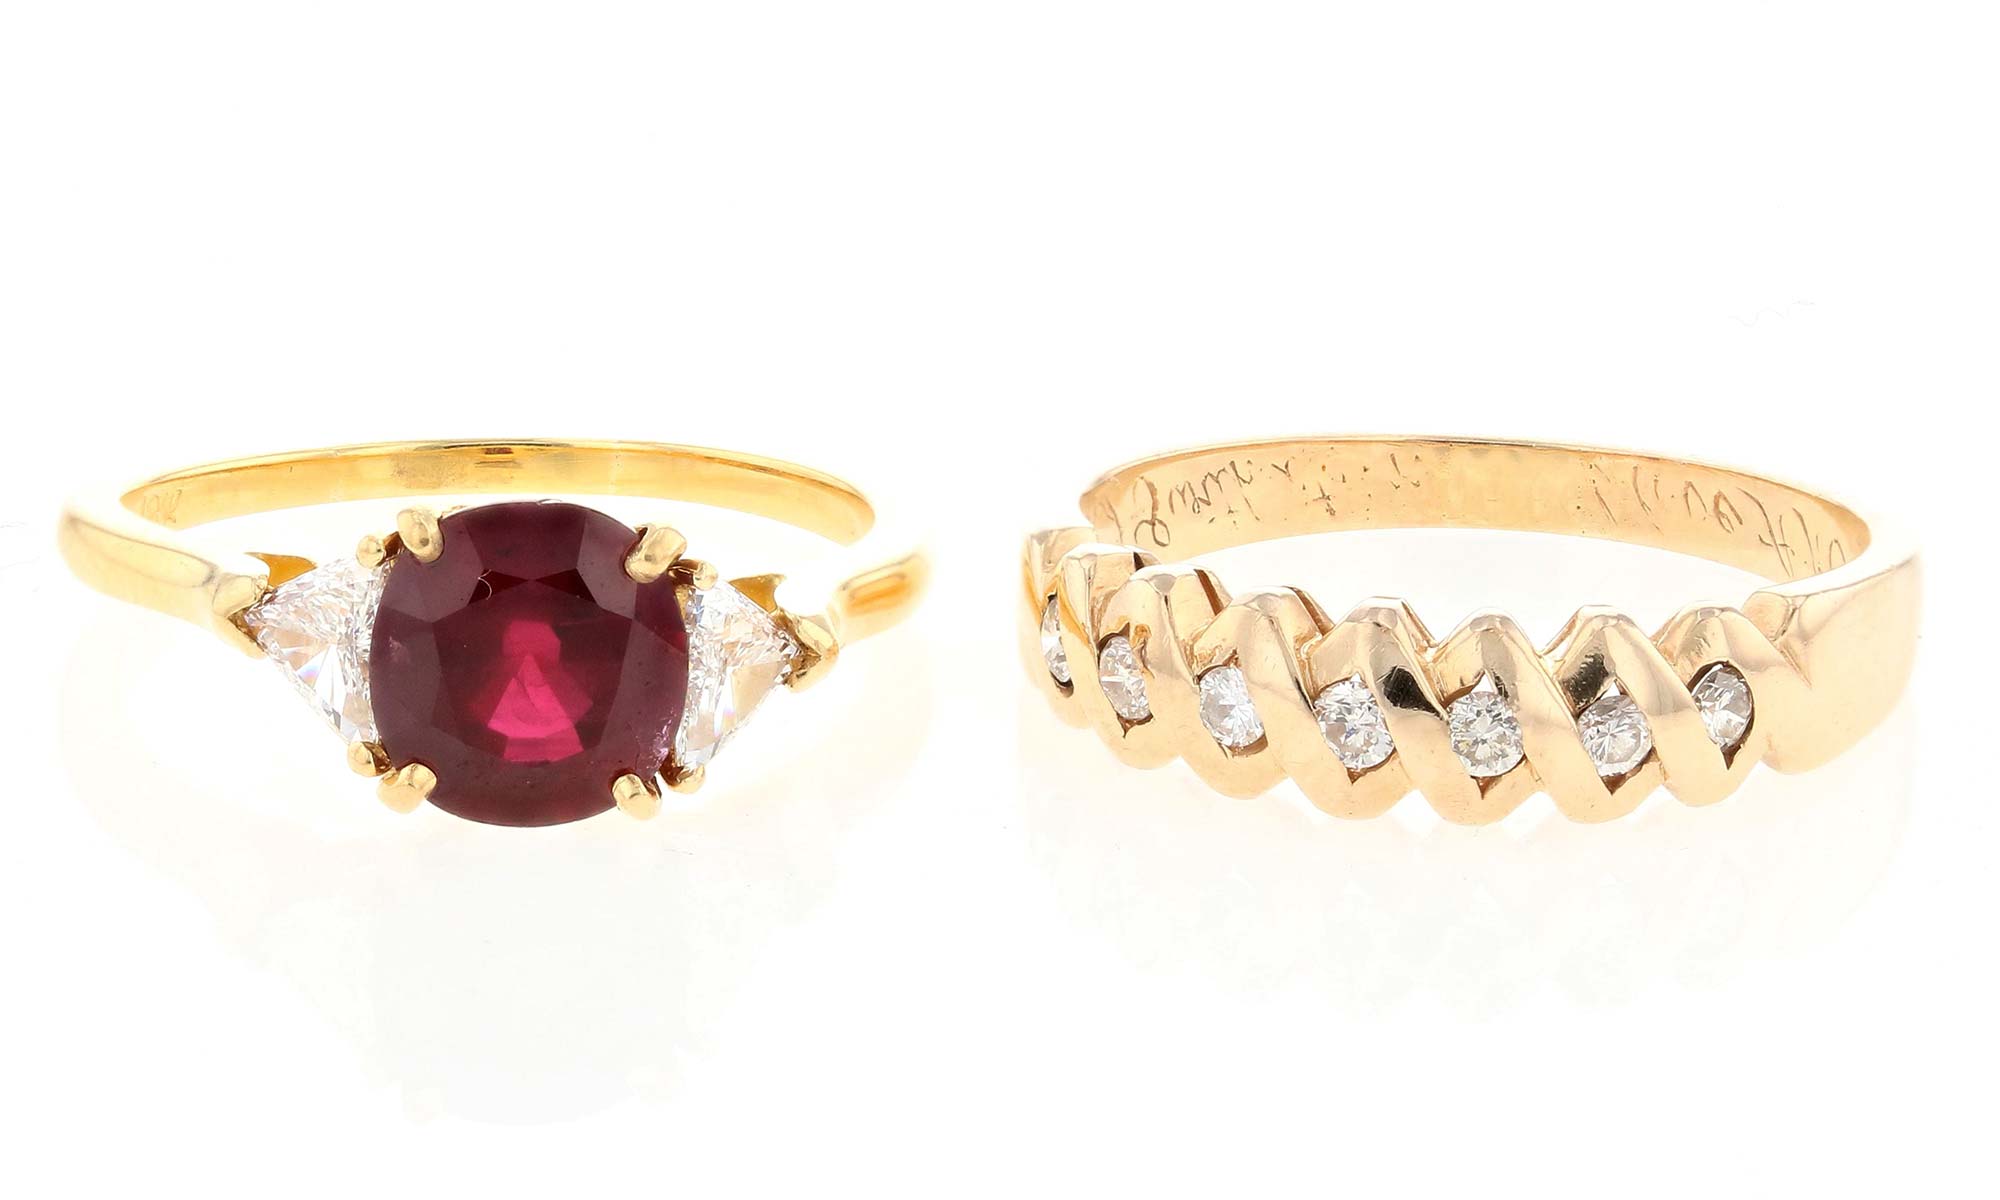 Ruby ring and diamond band before custom transformation